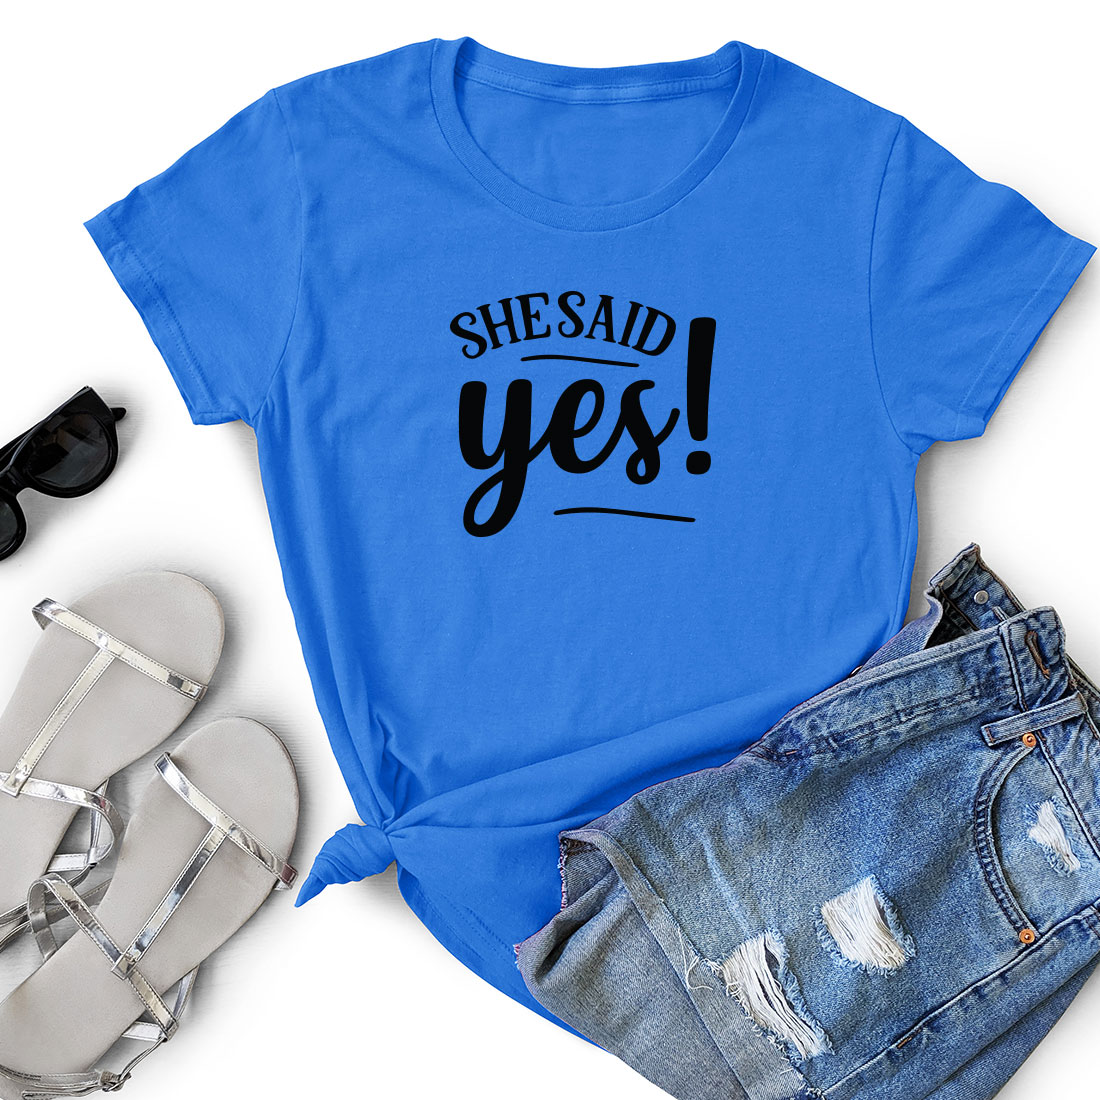 Blue shirt that says she said yes next to a pair of shorts.